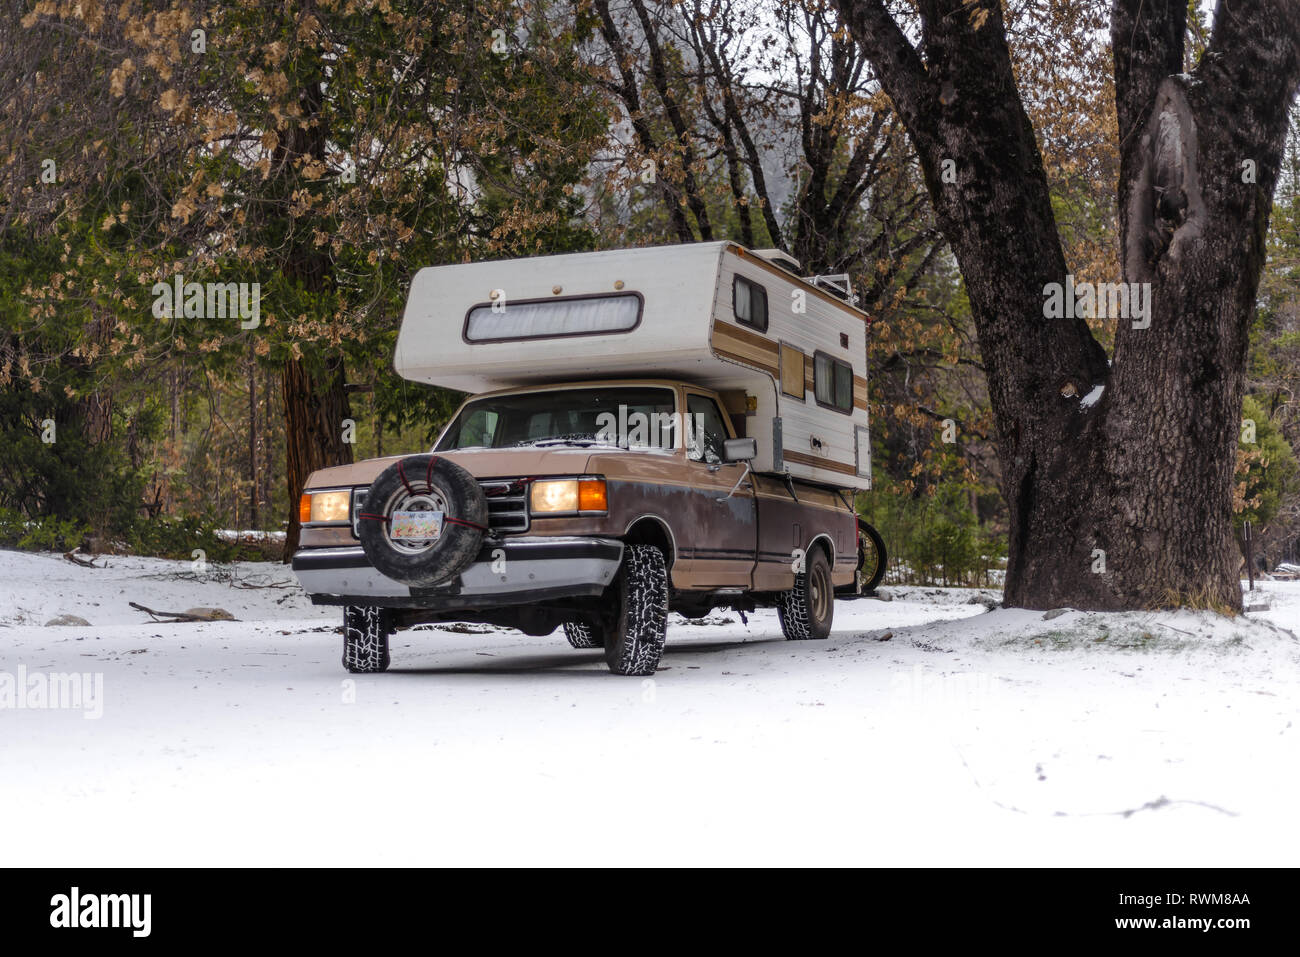 Campervan parked on snow covered ground, Yosemite National Park, California, USA Stock Photo